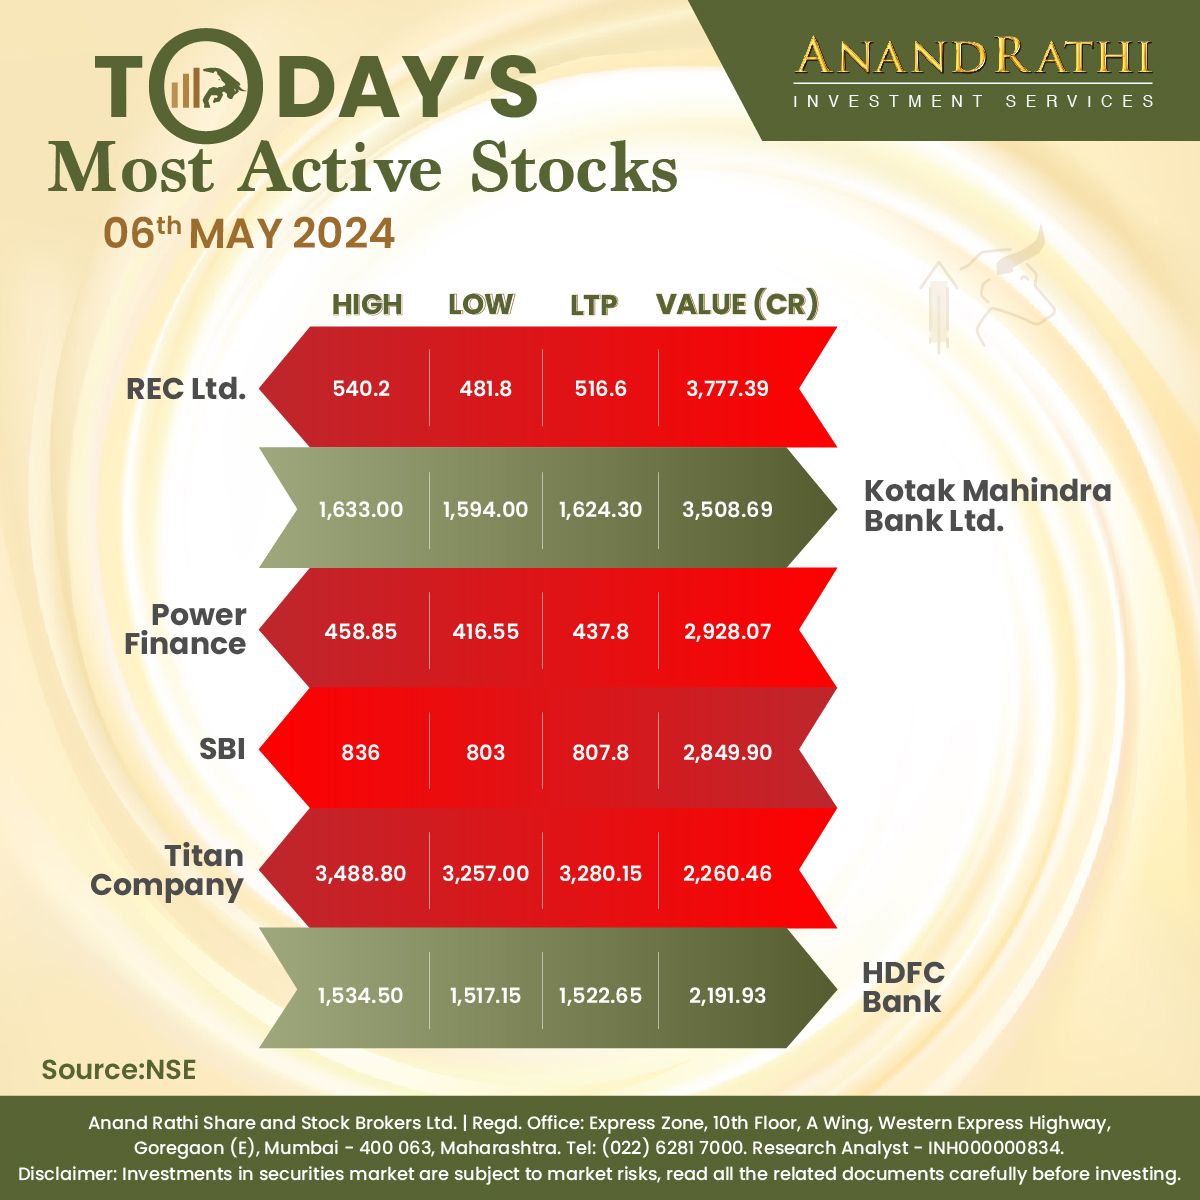 Take a glimpse of Today's Active Stocks!

#AnandRathi #Stockbroker #stockmarket #stocks #investing #trading #investment #money #finance #nifty

Disc: bit.ly/ARDisclaimerRe…